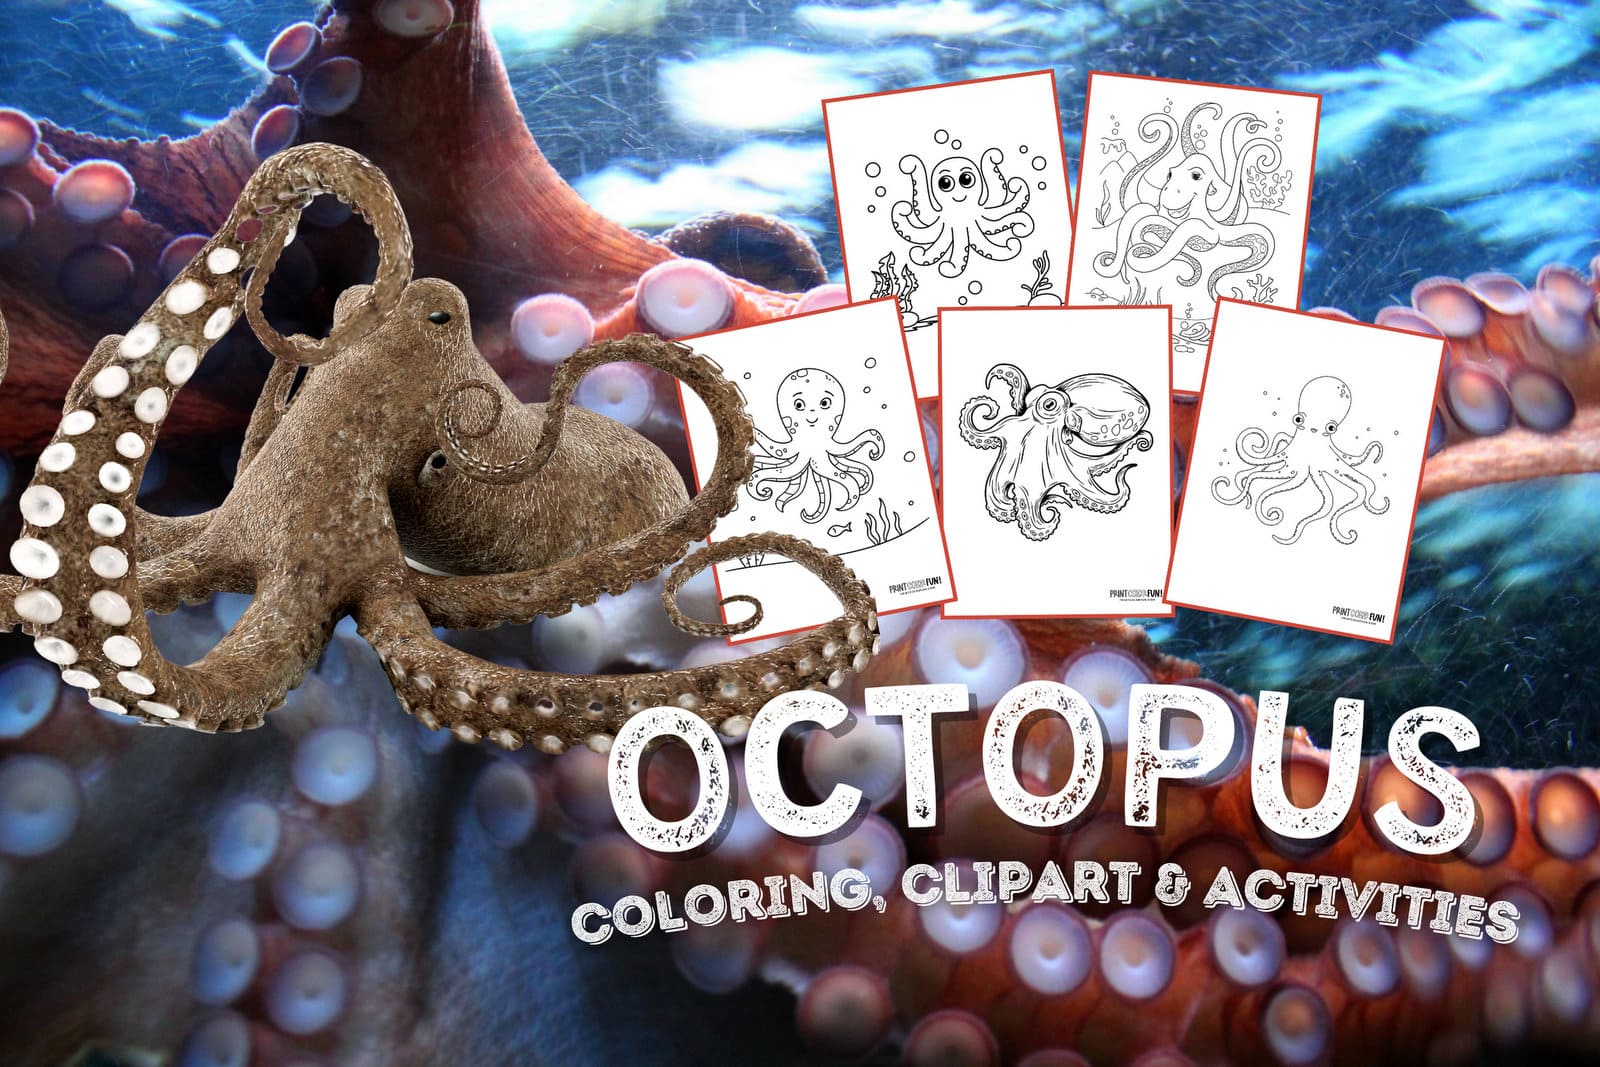 Octopus coloring page clipart activities from PrintColorFun com